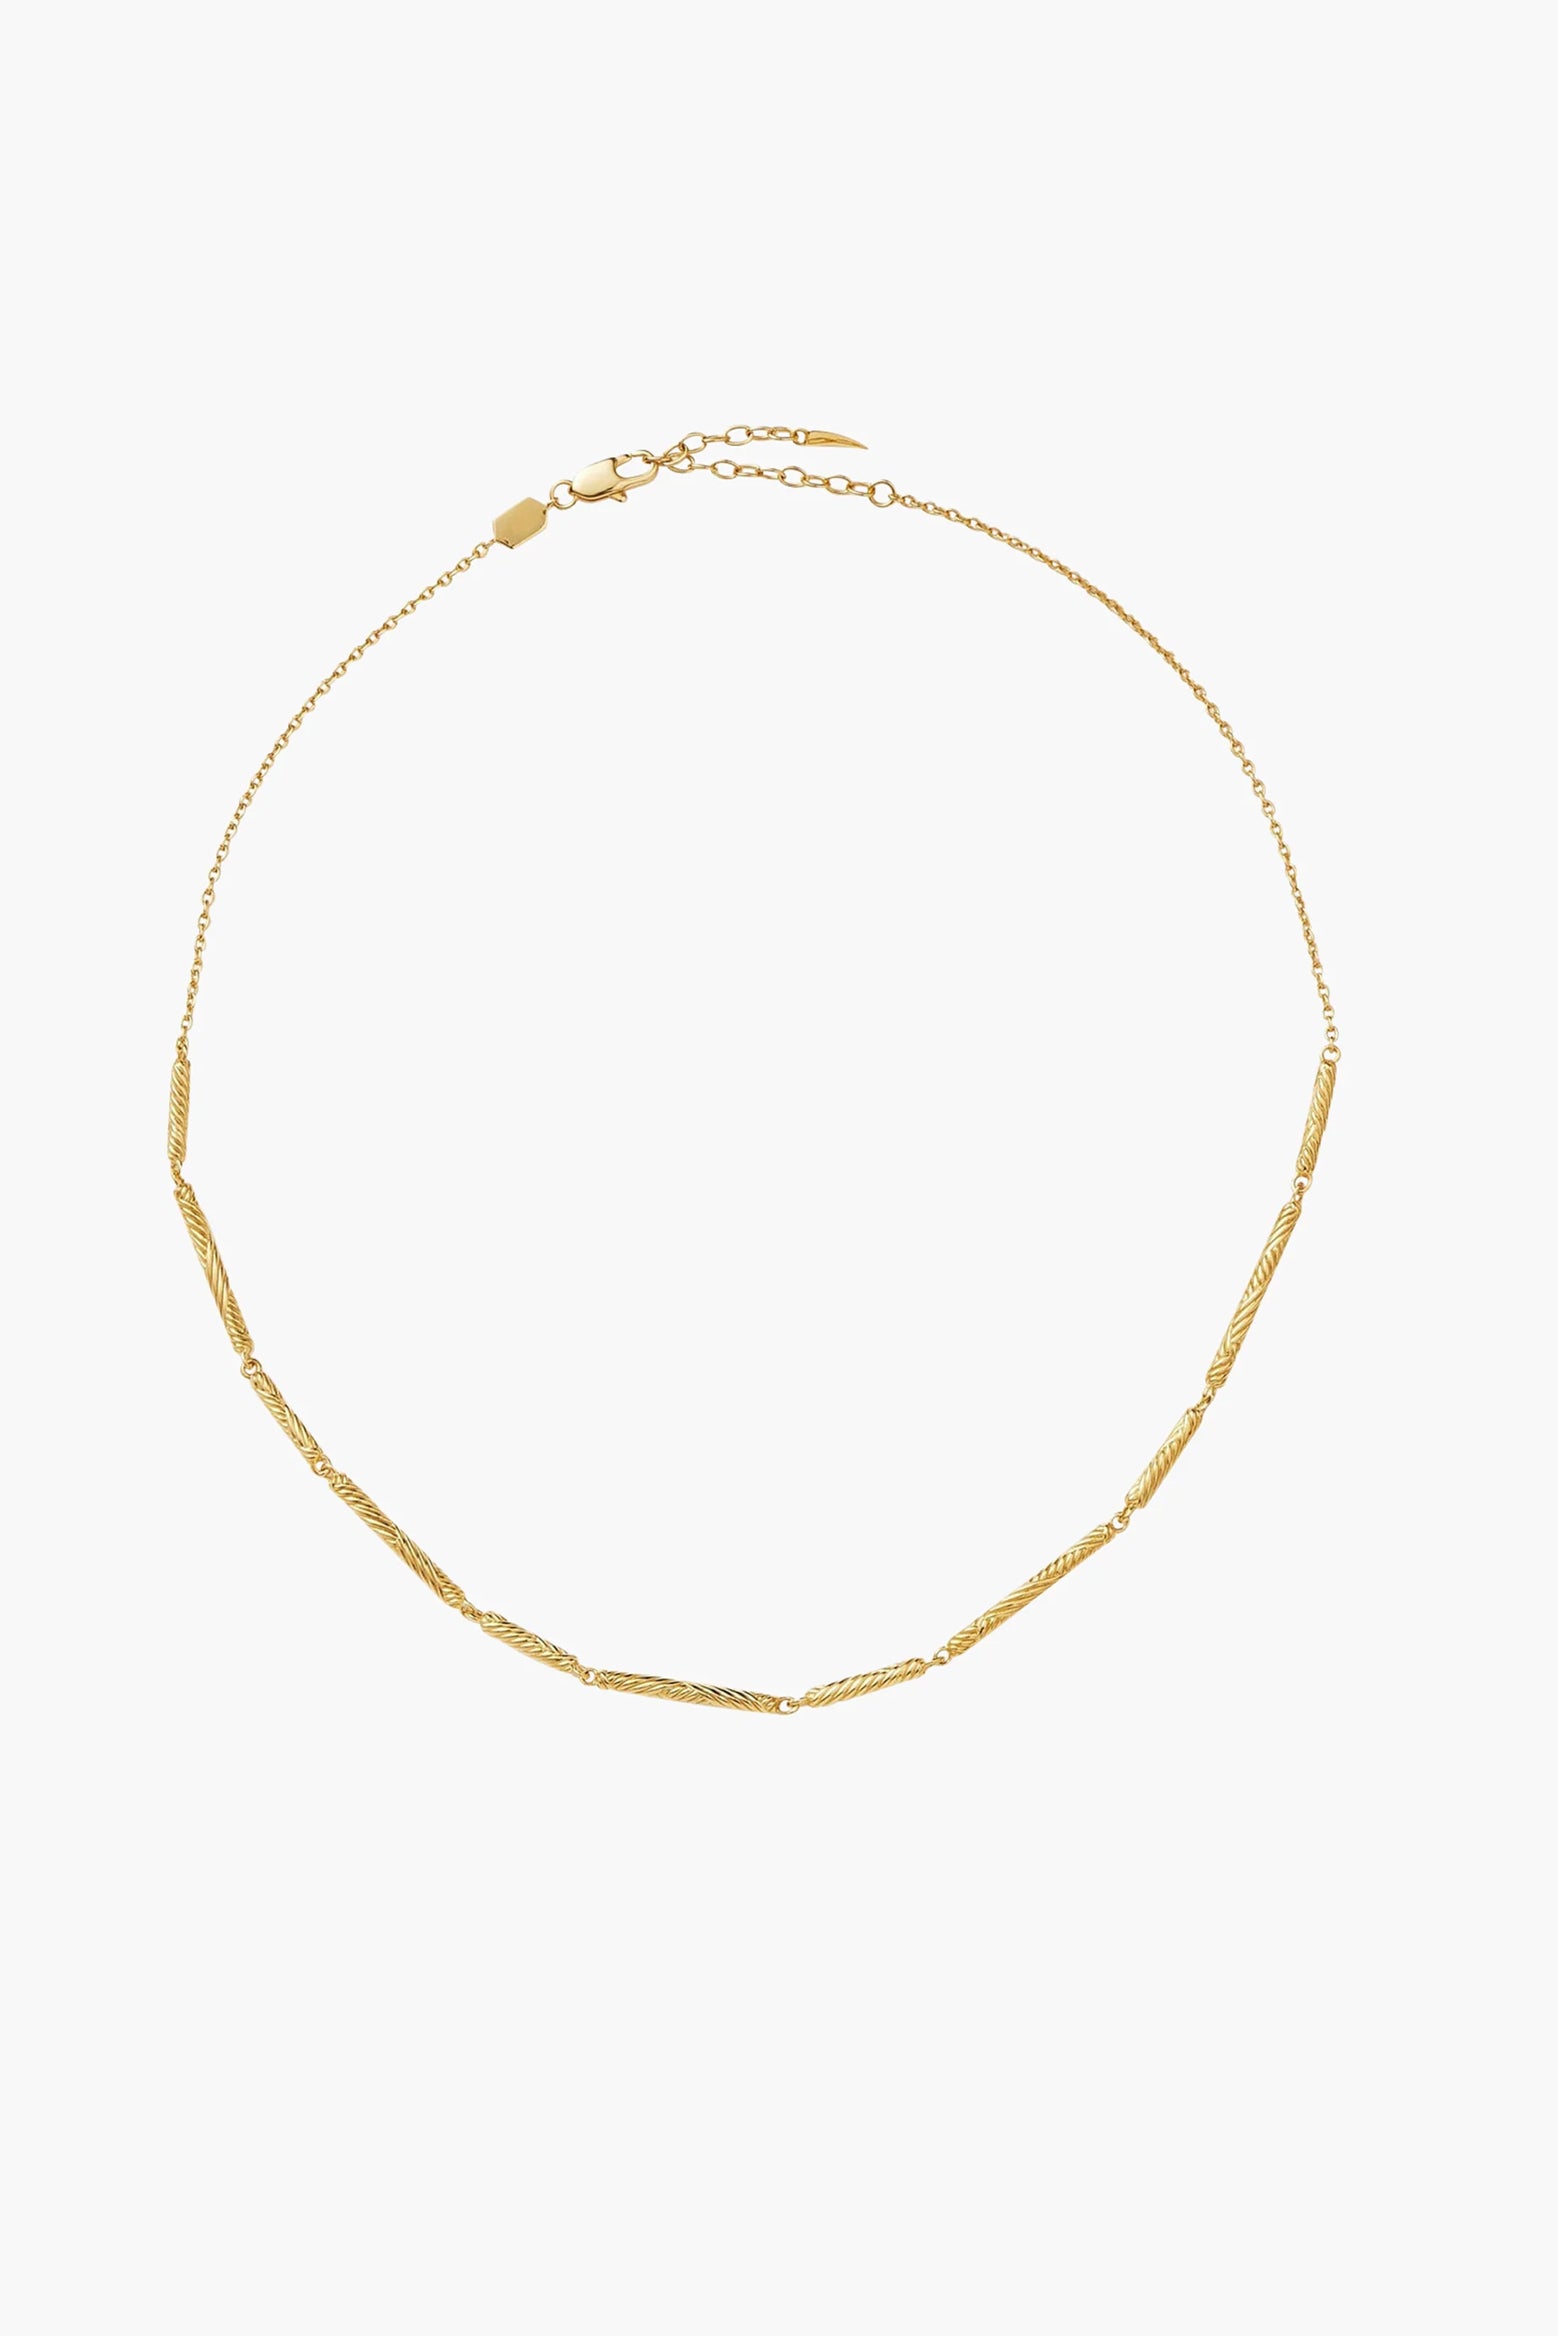 The Missoma Wavy Tube Choker Necklace in Gold available at The New Trend Australia